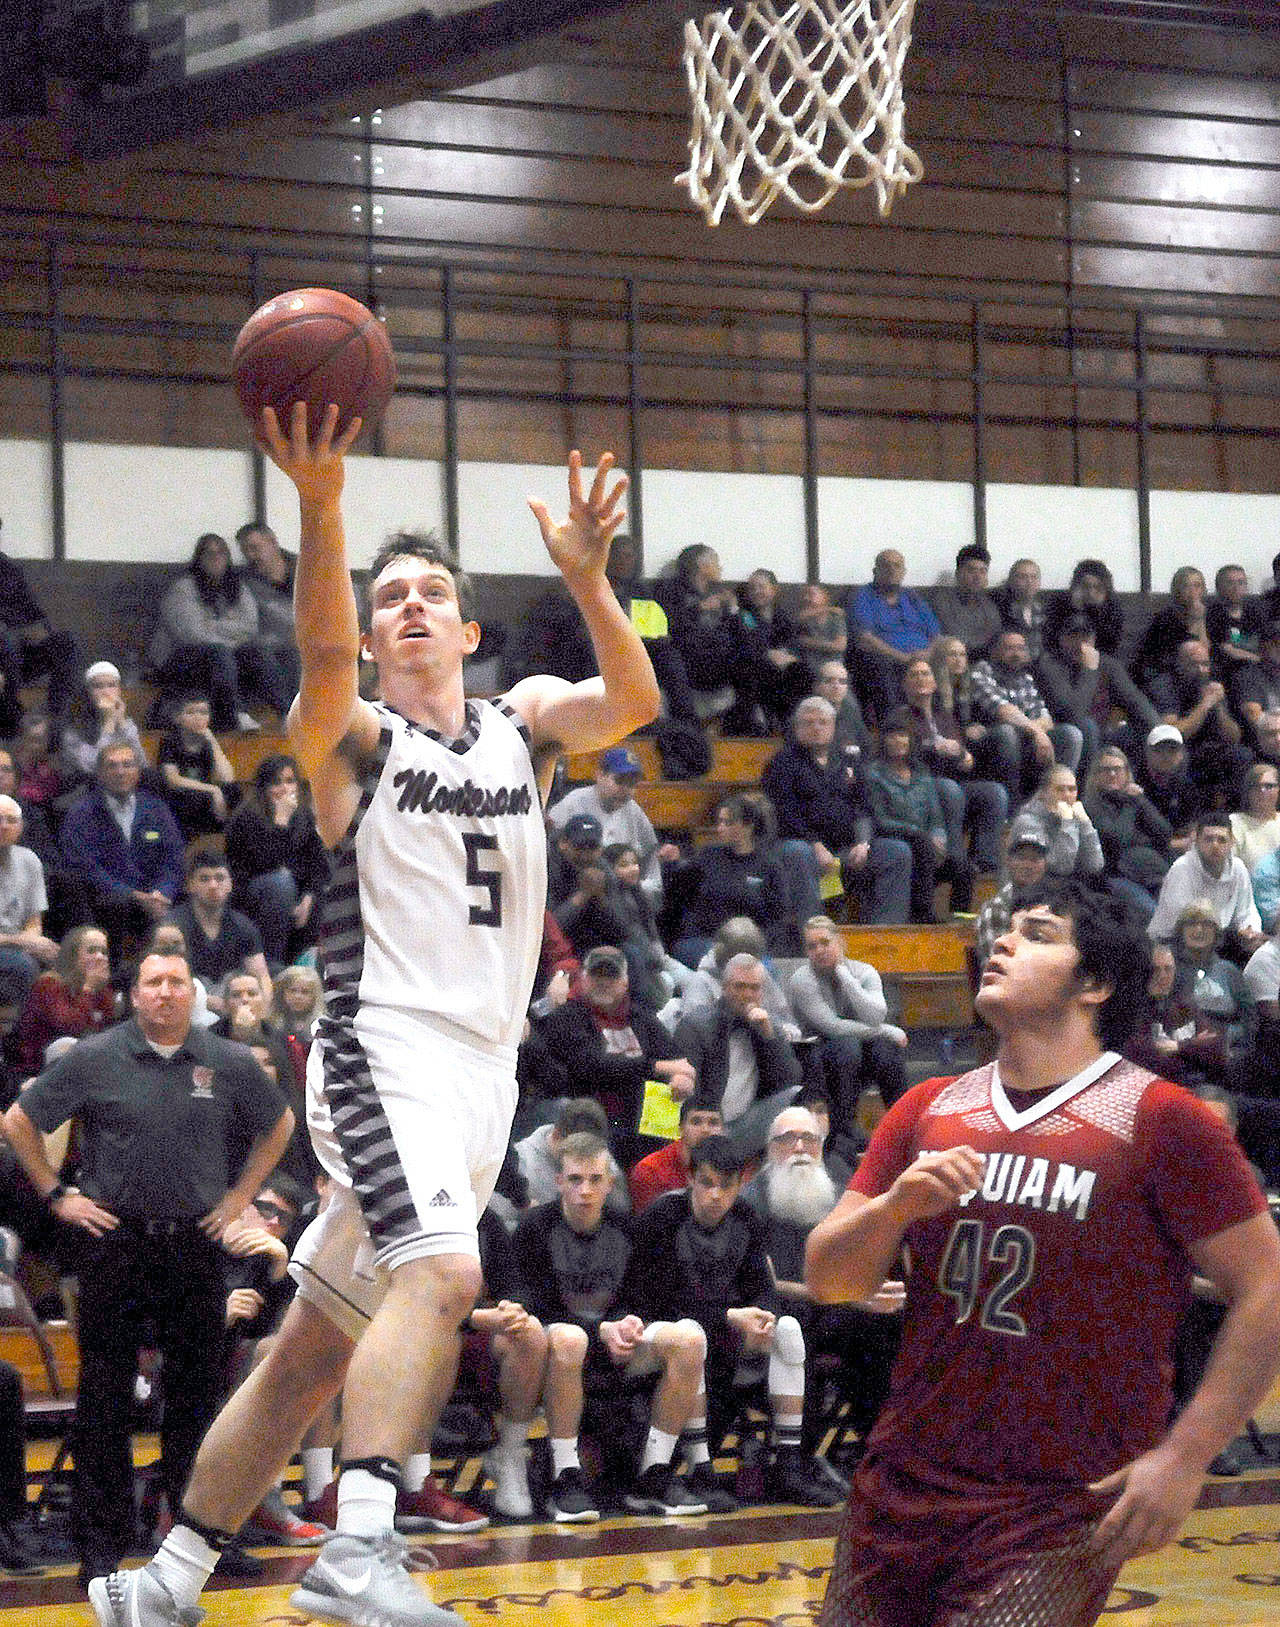 Montesano’s Evan Bates hits layup in the first quarter against Hoquiam on Friday. Bates led the Bulldogs with 24 points in Montesano’s 69-47 win on Friday. (Hasani Grayson | Grays Harbor News Group)